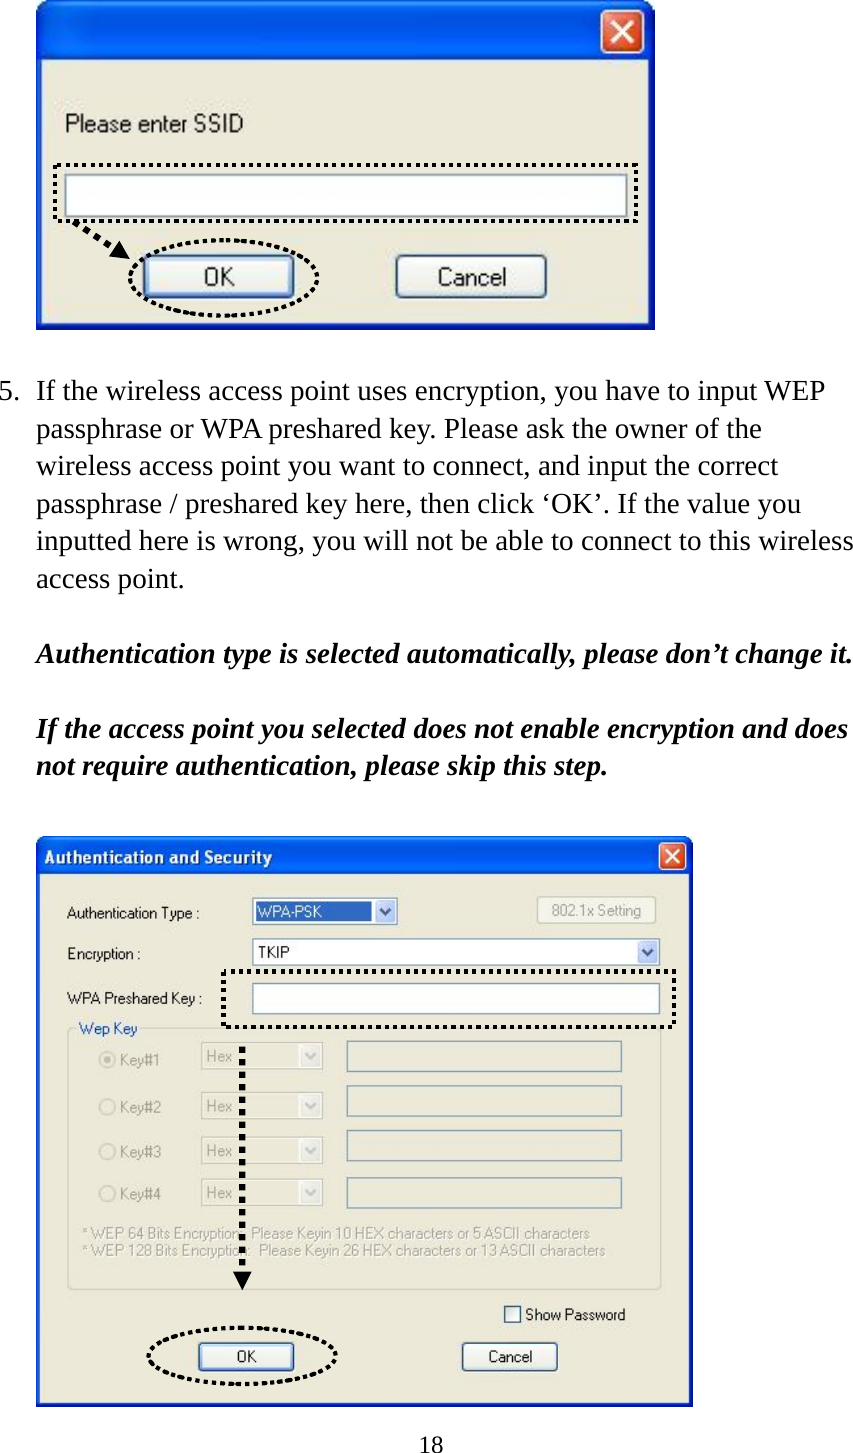  18   5. If the wireless access point uses encryption, you have to input WEP passphrase or WPA preshared key. Please ask the owner of the wireless access point you want to connect, and input the correct passphrase / preshared key here, then click ‘OK’. If the value you inputted here is wrong, you will not be able to connect to this wireless access point.  Authentication type is selected automatically, please don’t change it.    If the access point you selected does not enable encryption and does not require authentication, please skip this step.   